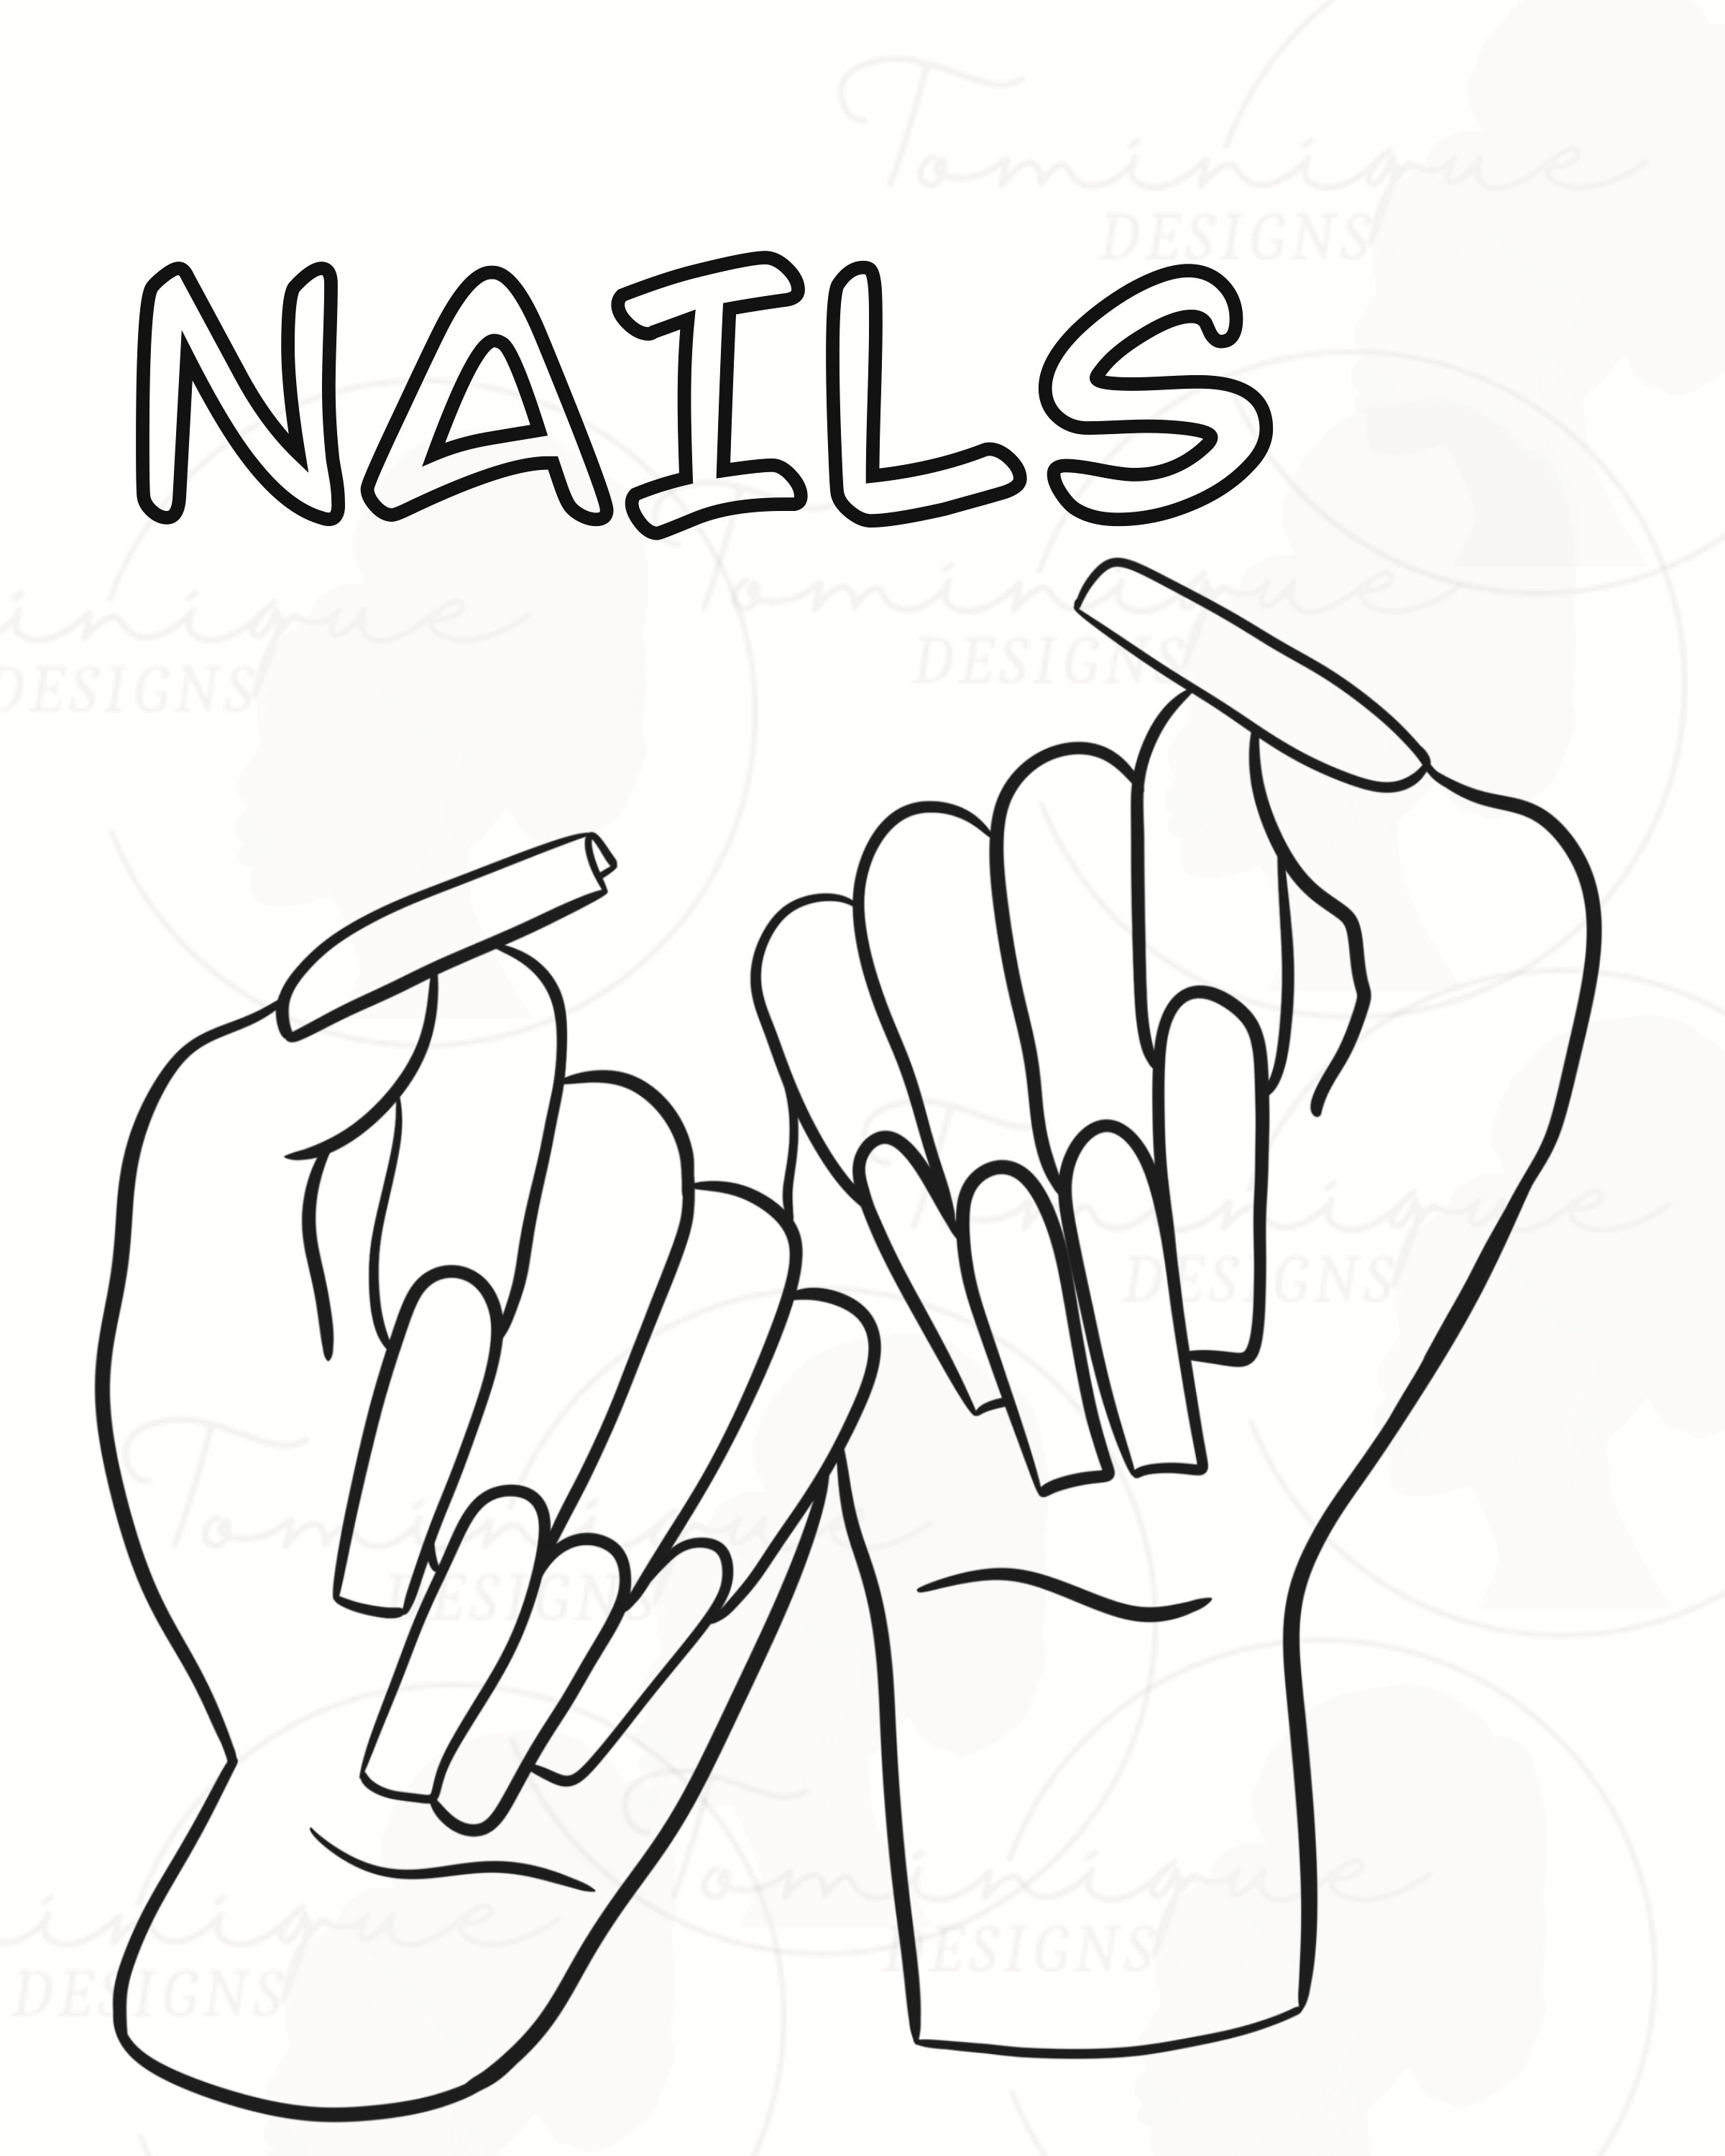 Nails coloring page paint and sip art